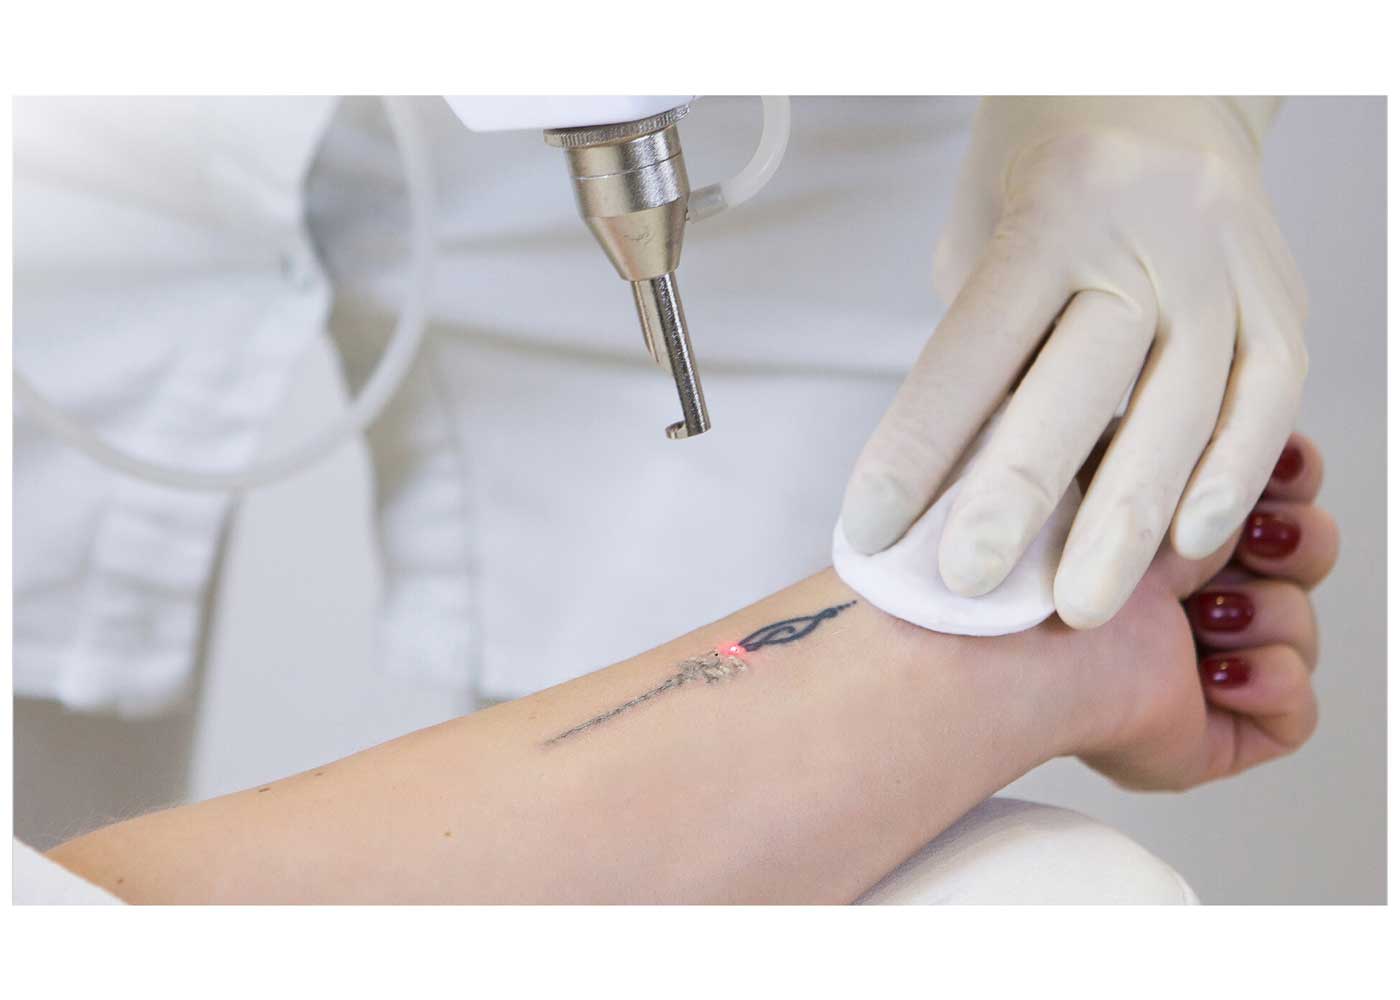 Tattoo Removal - Your Path to a Regret-Free Future